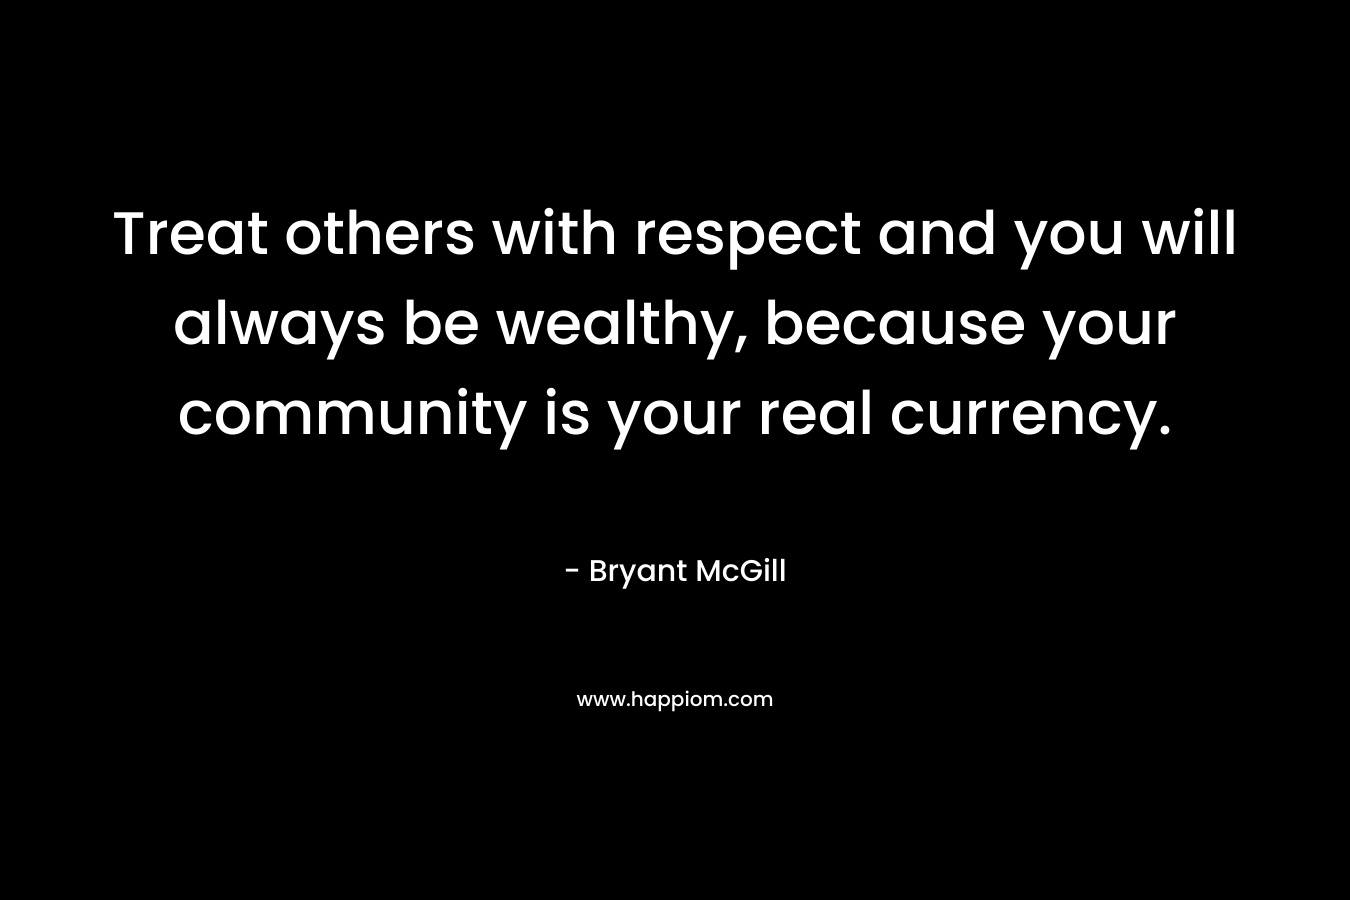 Treat others with respect and you will always be wealthy, because your community is your real currency.